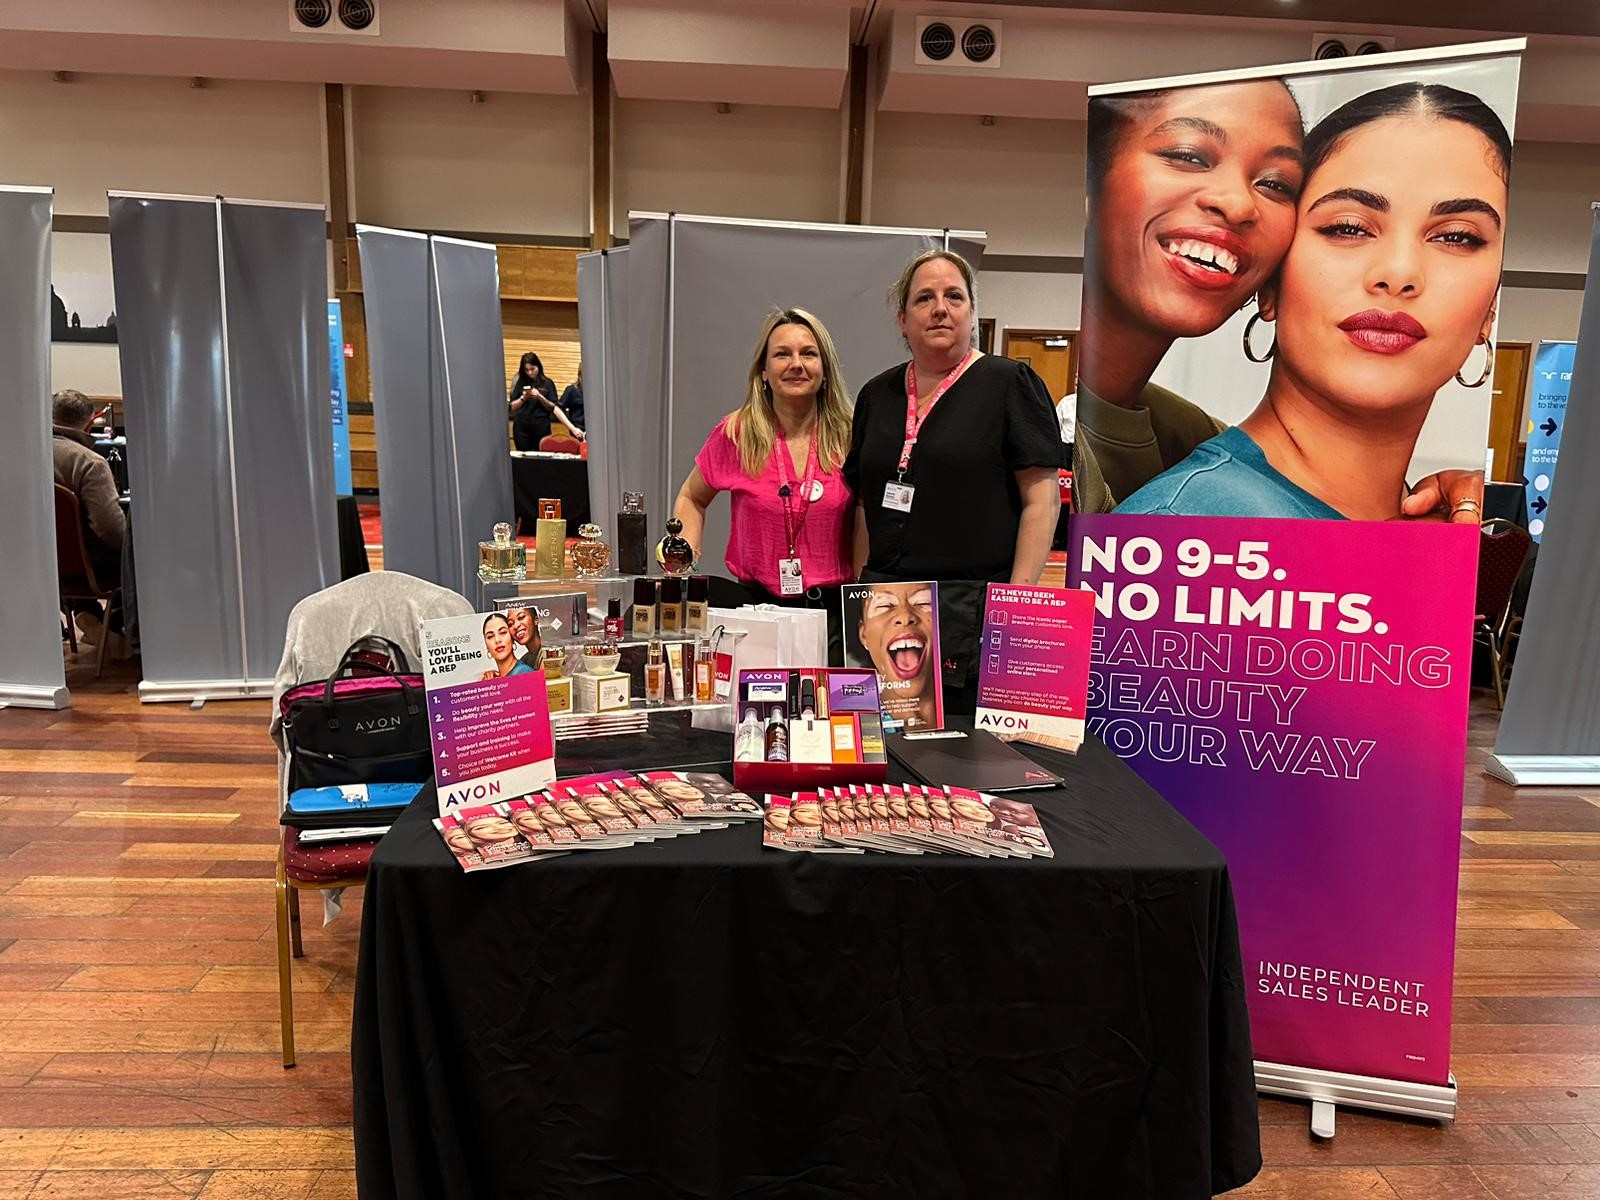 Avon at our event in Luton